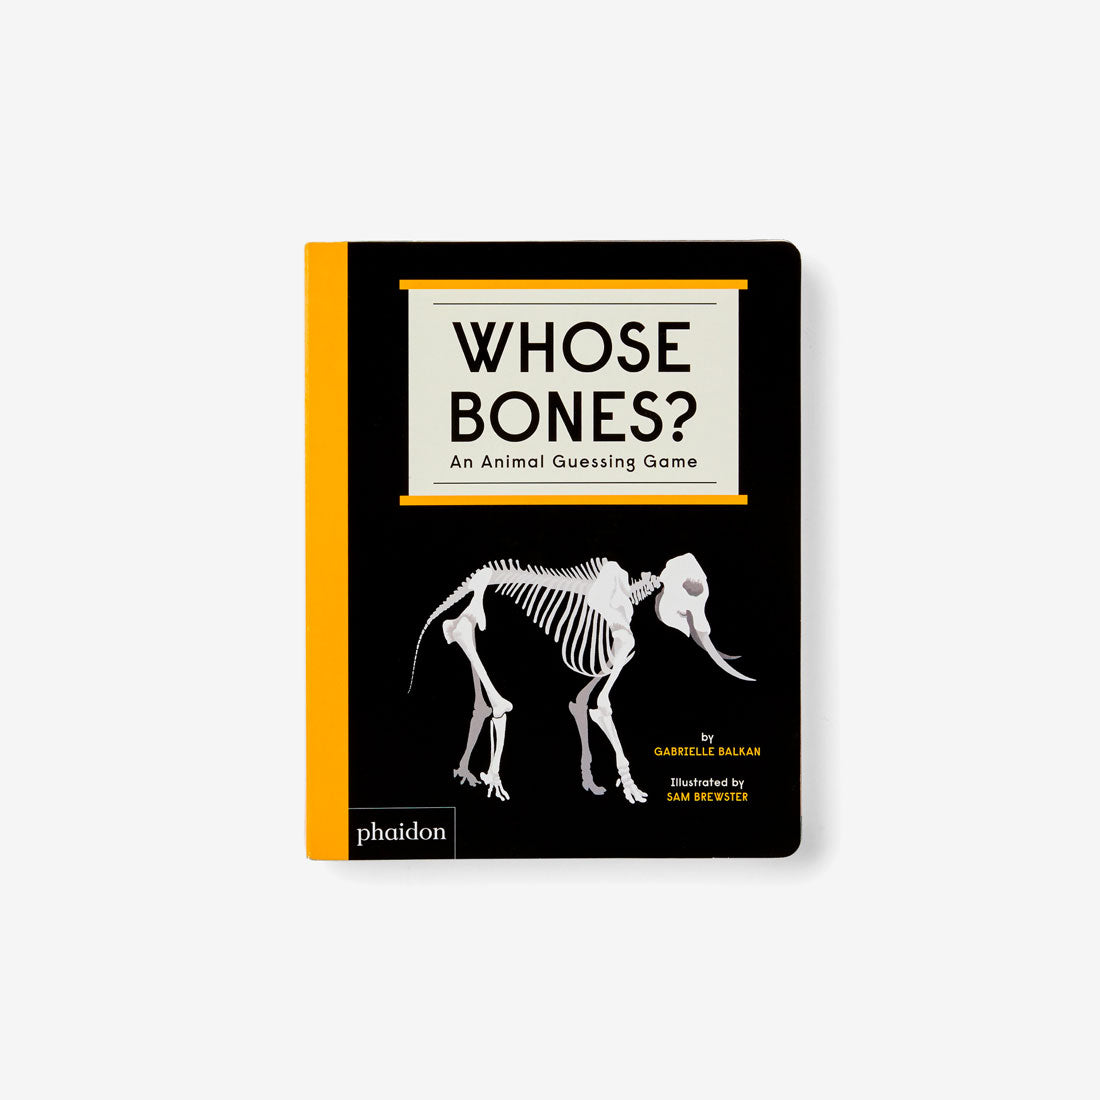 Whose Bones: An Animal Guessing Game